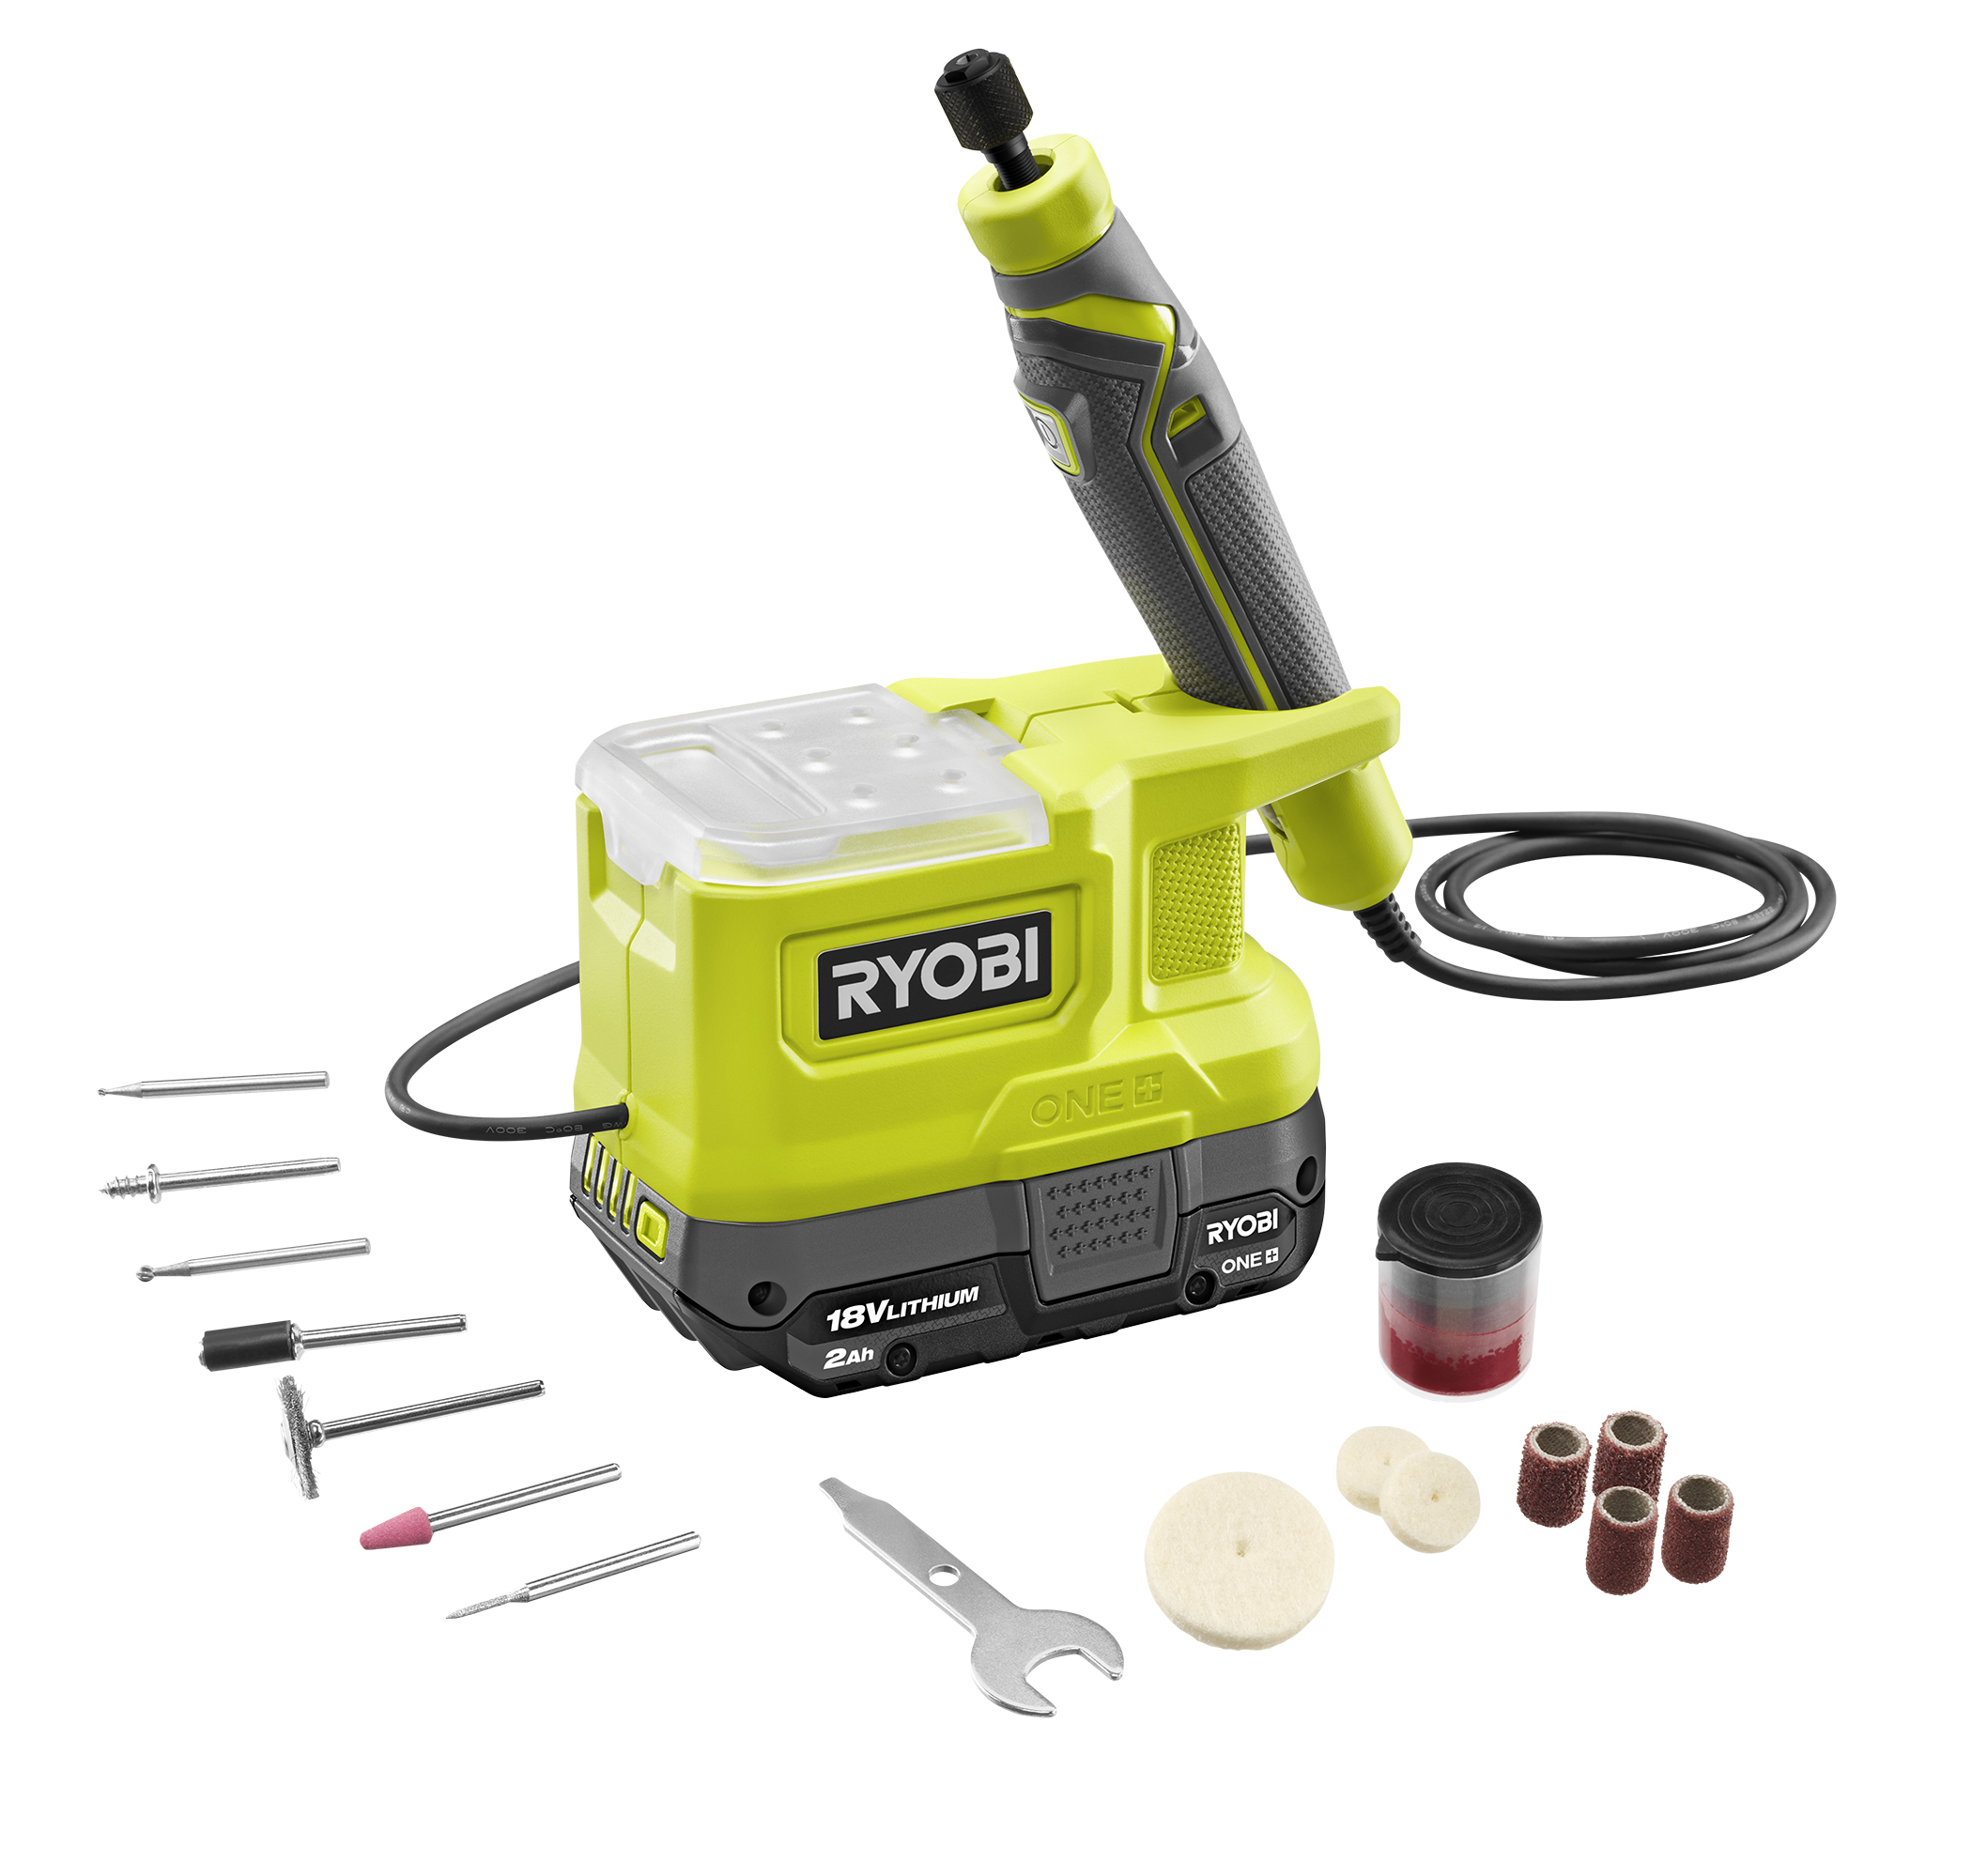 Ryobi's Compact Lithium Rotary Tool Offers Precise Power - Today's